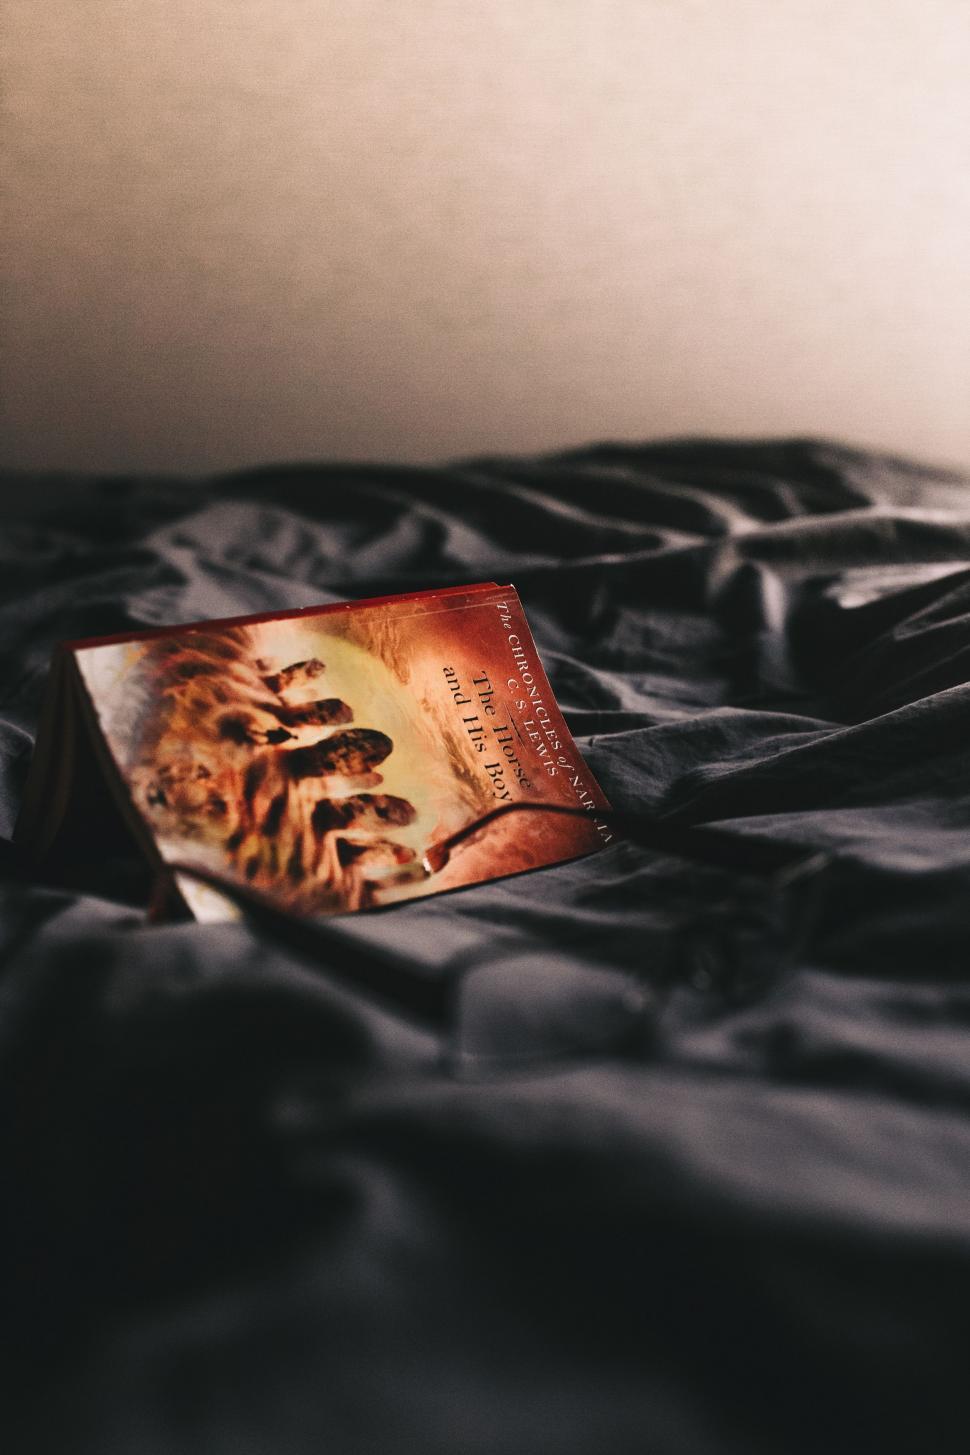 Free Image of Book Resting on Black Bed 